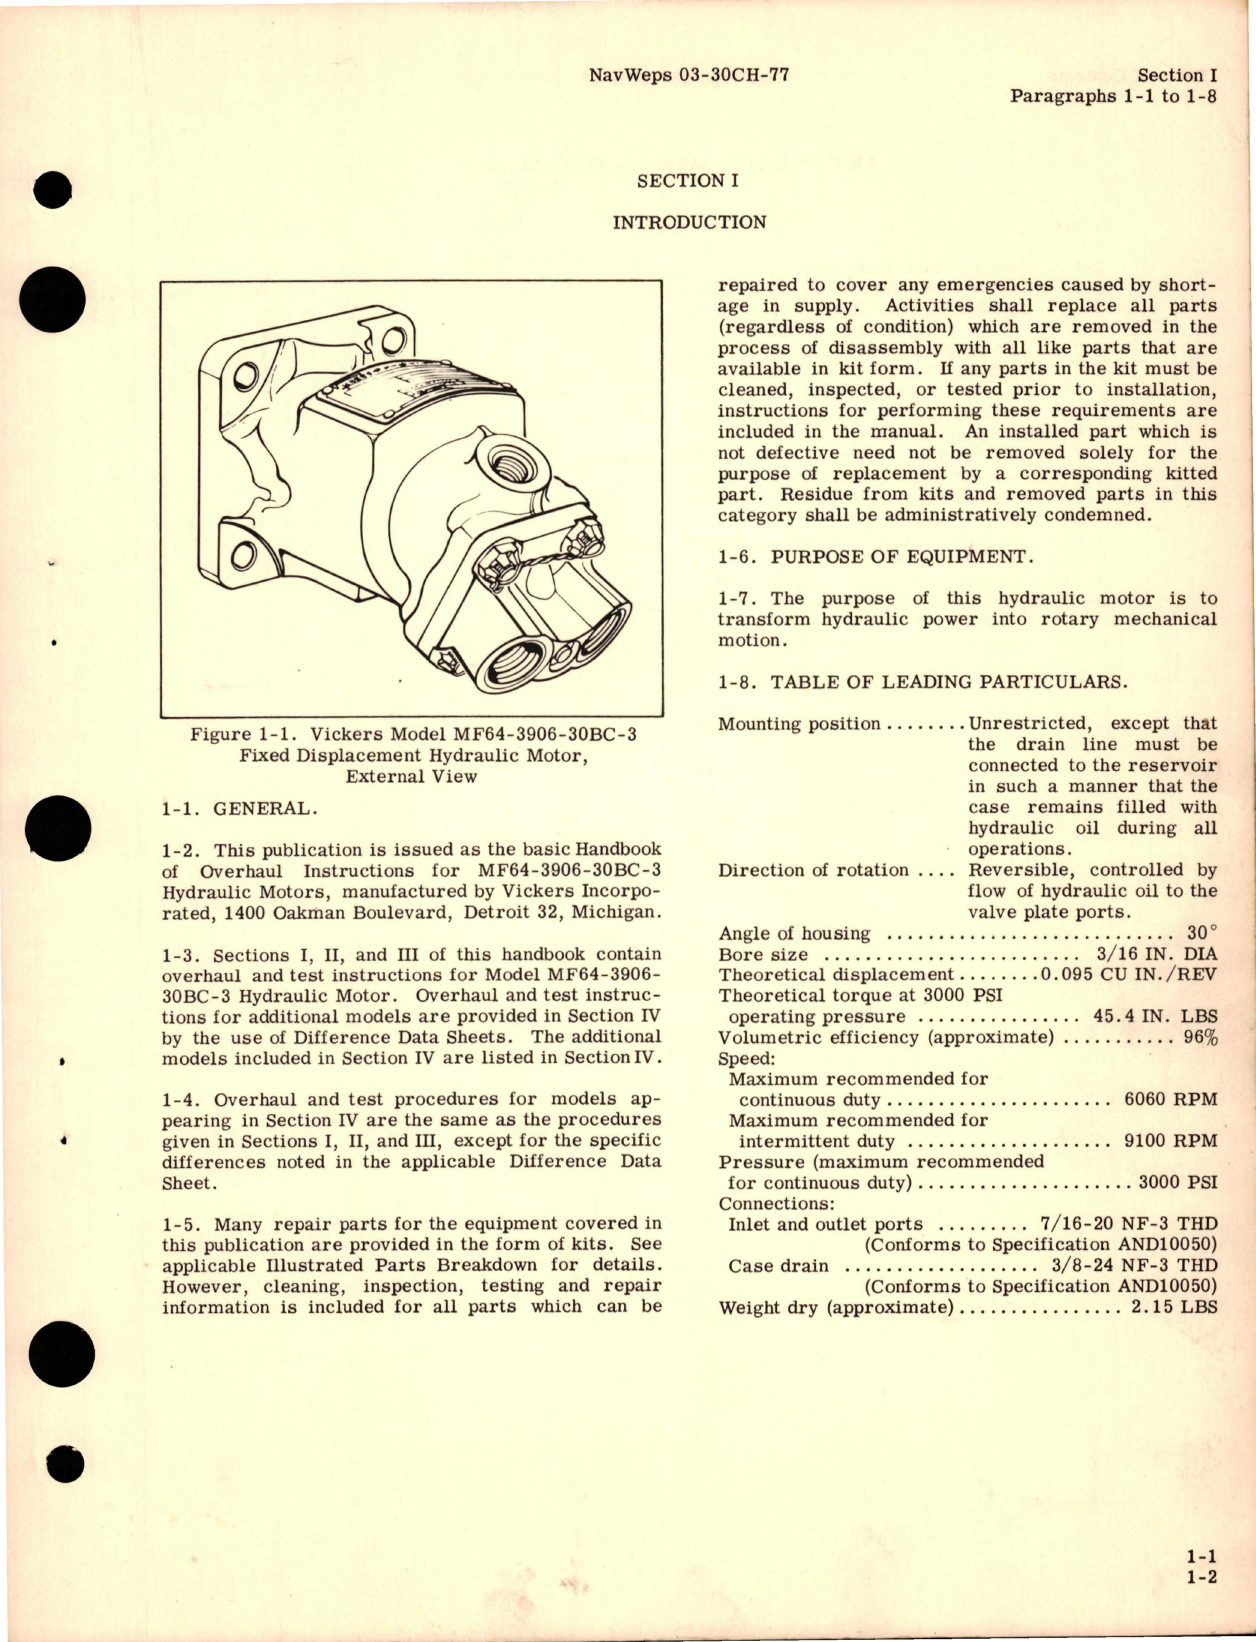 Sample page 5 from AirCorps Library document: Overhaul Instructions for Hydraulic Motor Assembly